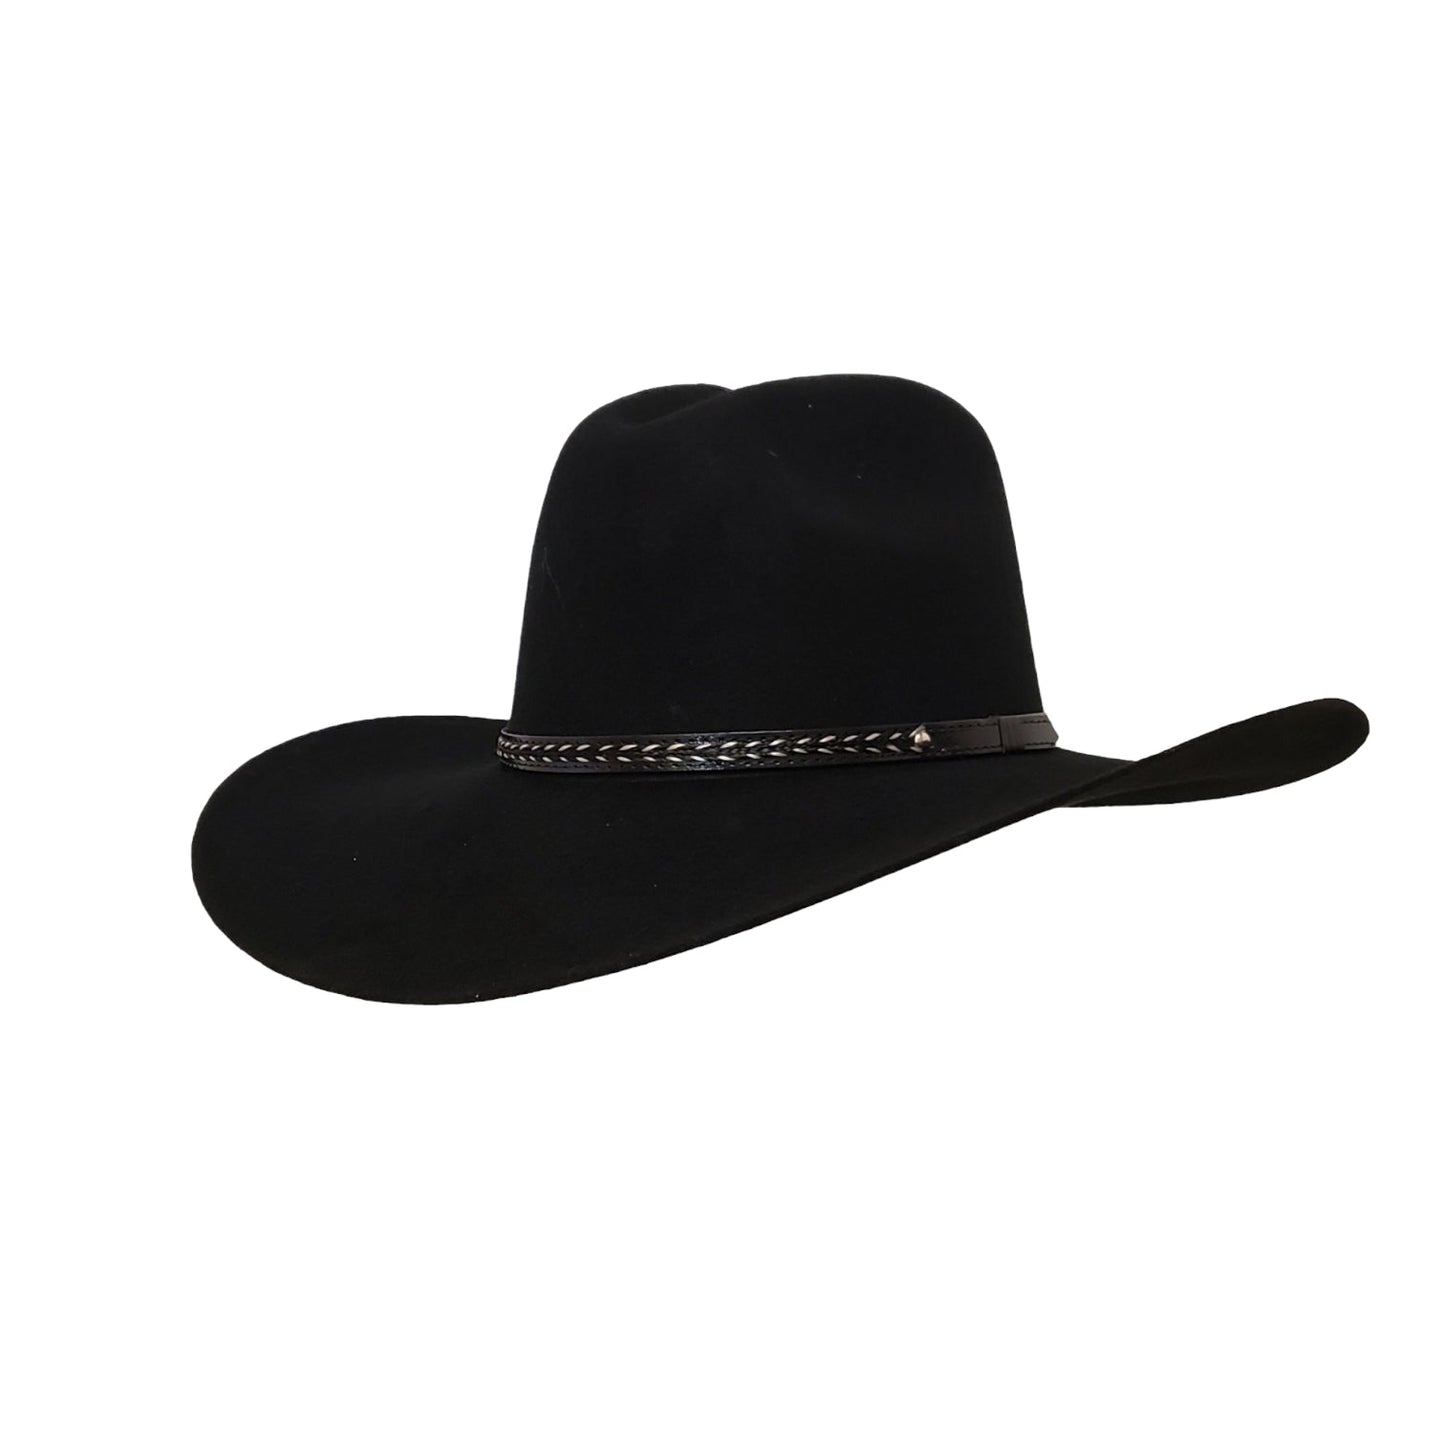 Gus crown black cashmer/wool cowboy hat at Gone Country Hats